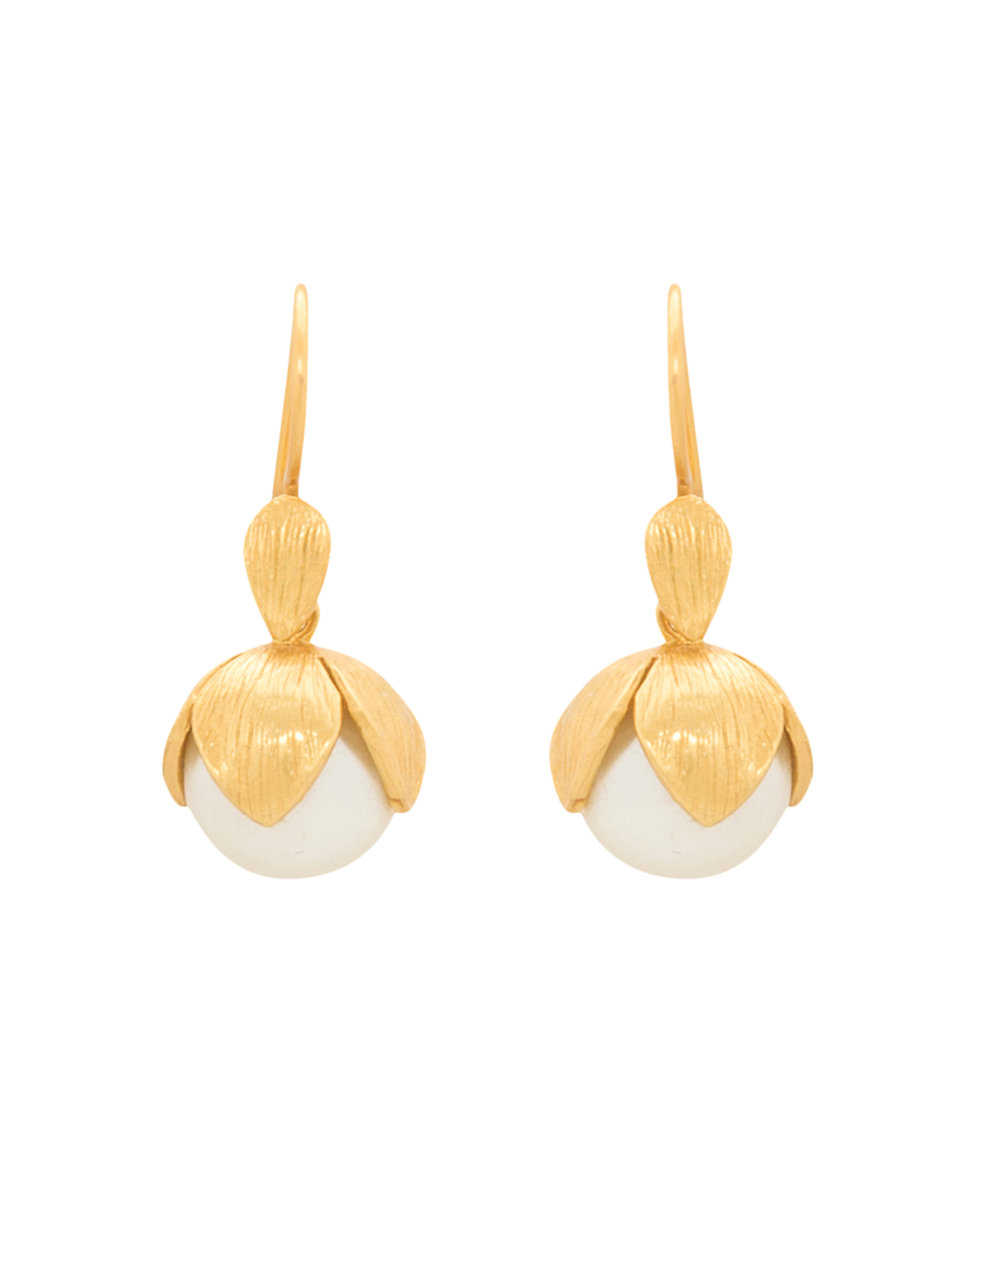   A piece of jewelry that catches the eye and adds interest to any outfit.  Julie Vos Penelope Gold Shell Pearl Earring, $148. 